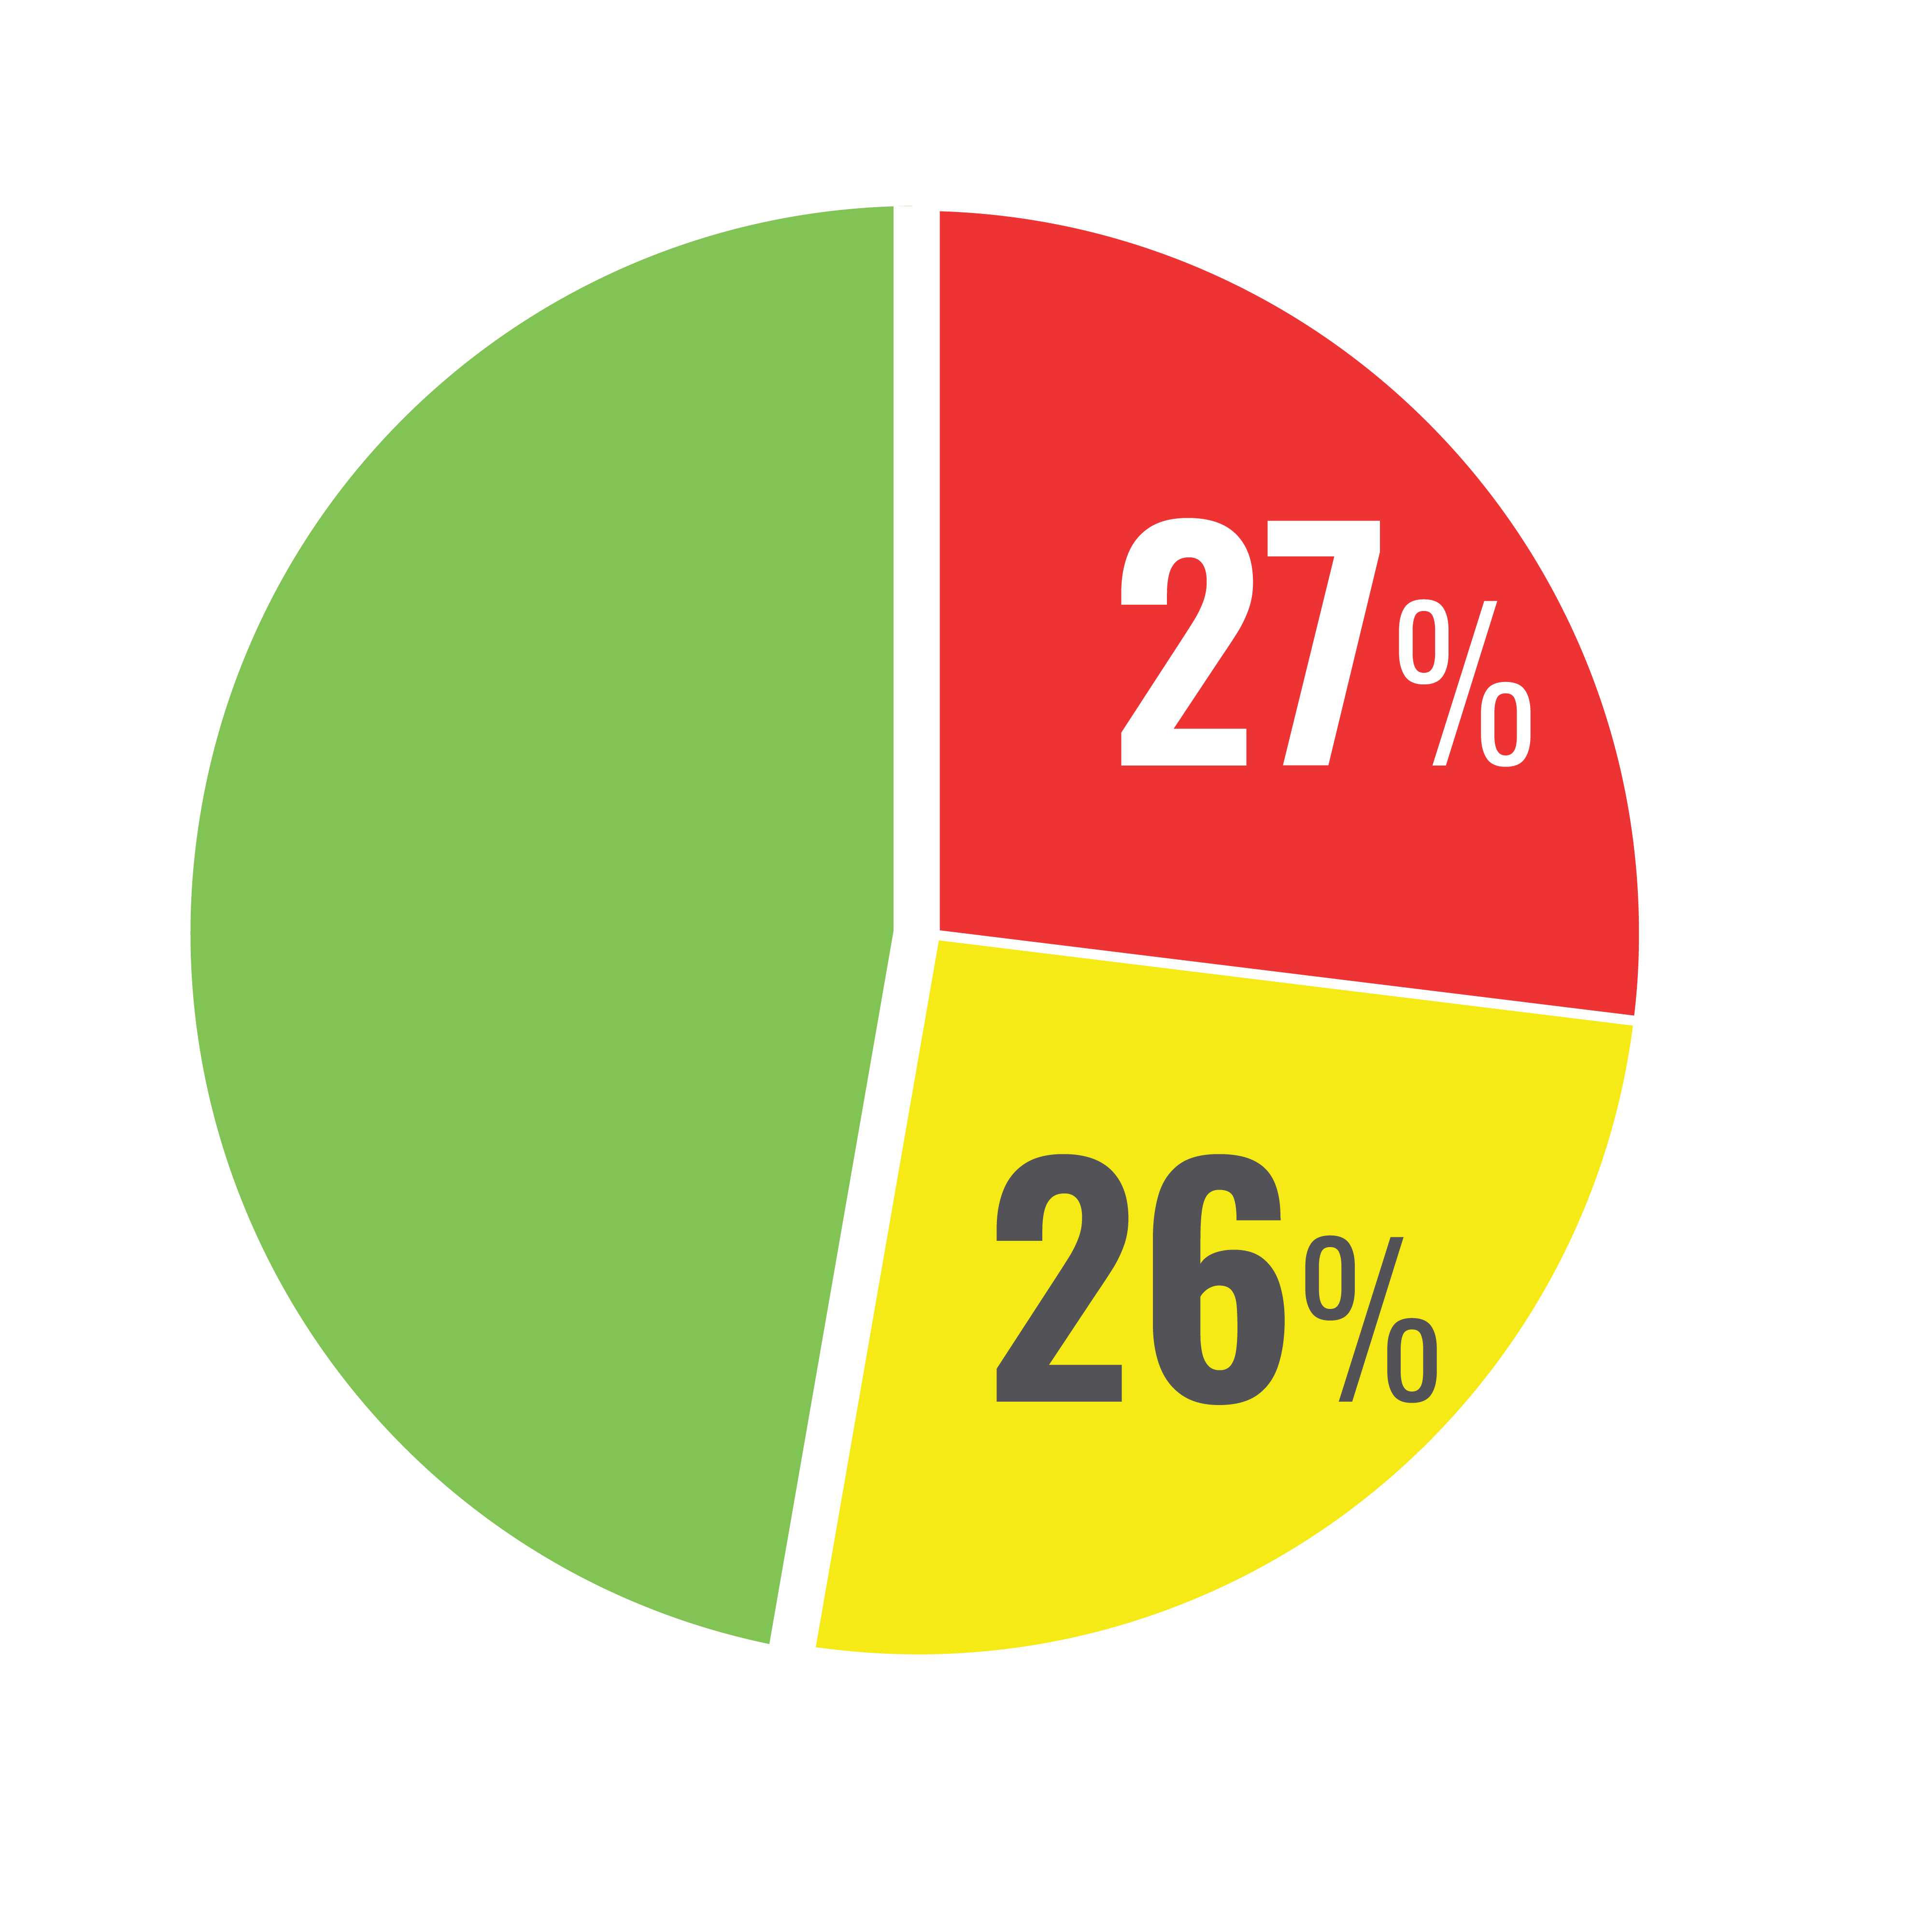 Pie chart showing Carbon Dioxide is very elevated in 27% of homes and slightly elevated in 26% of homes. 